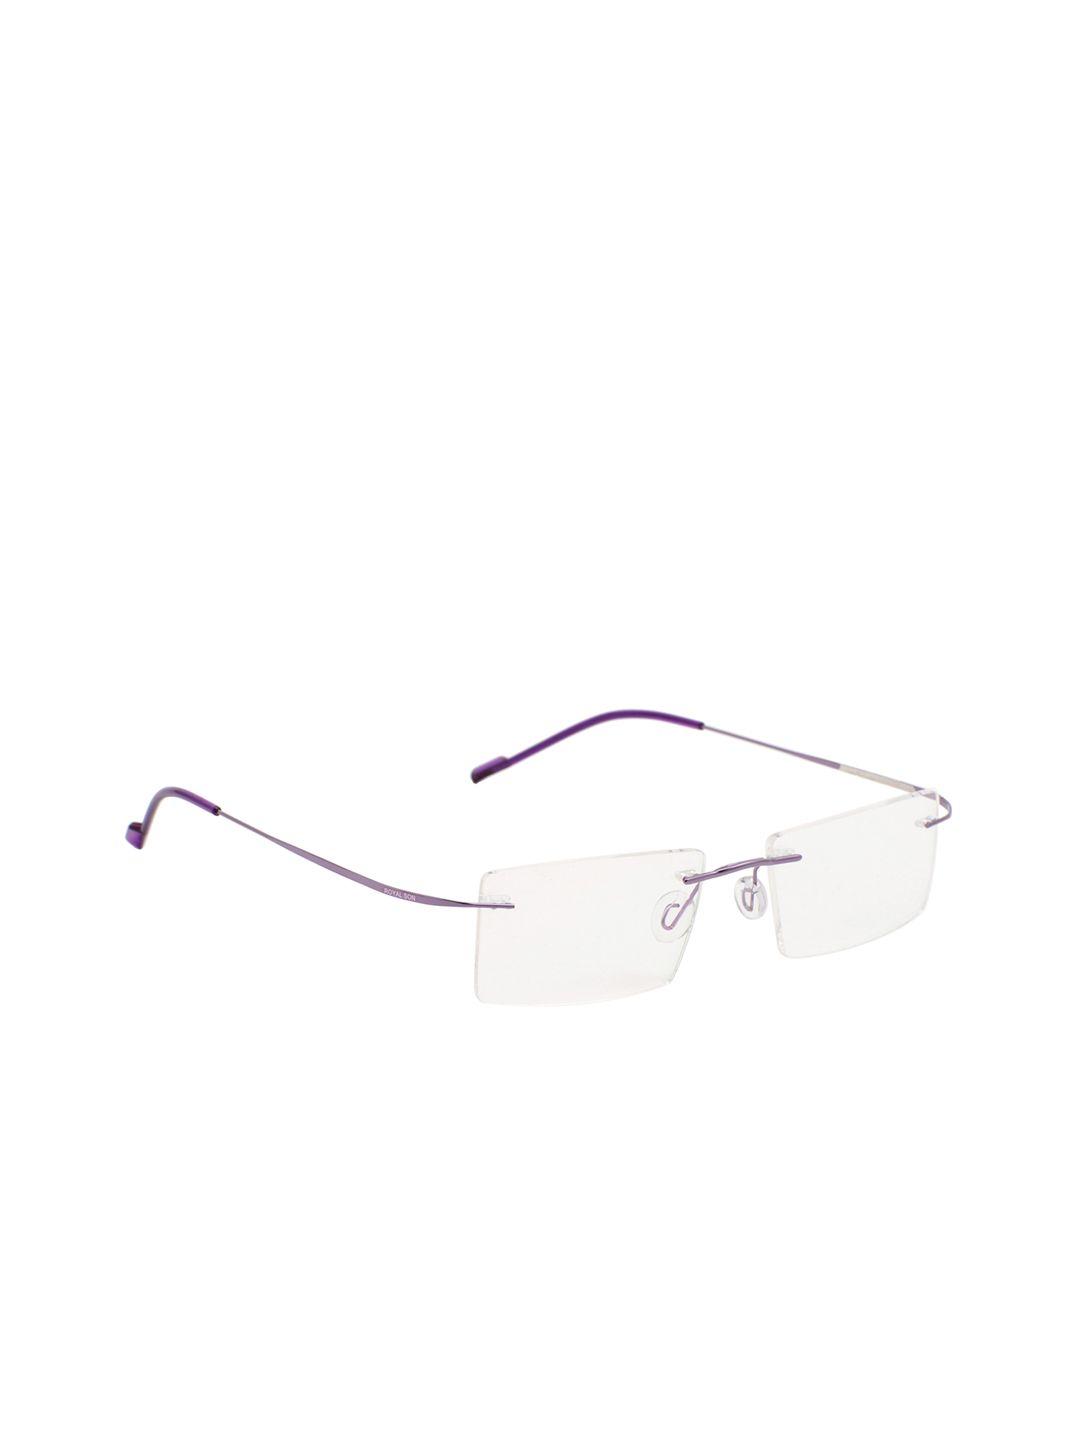 royal son unisex purple solid rimless rectangle frames